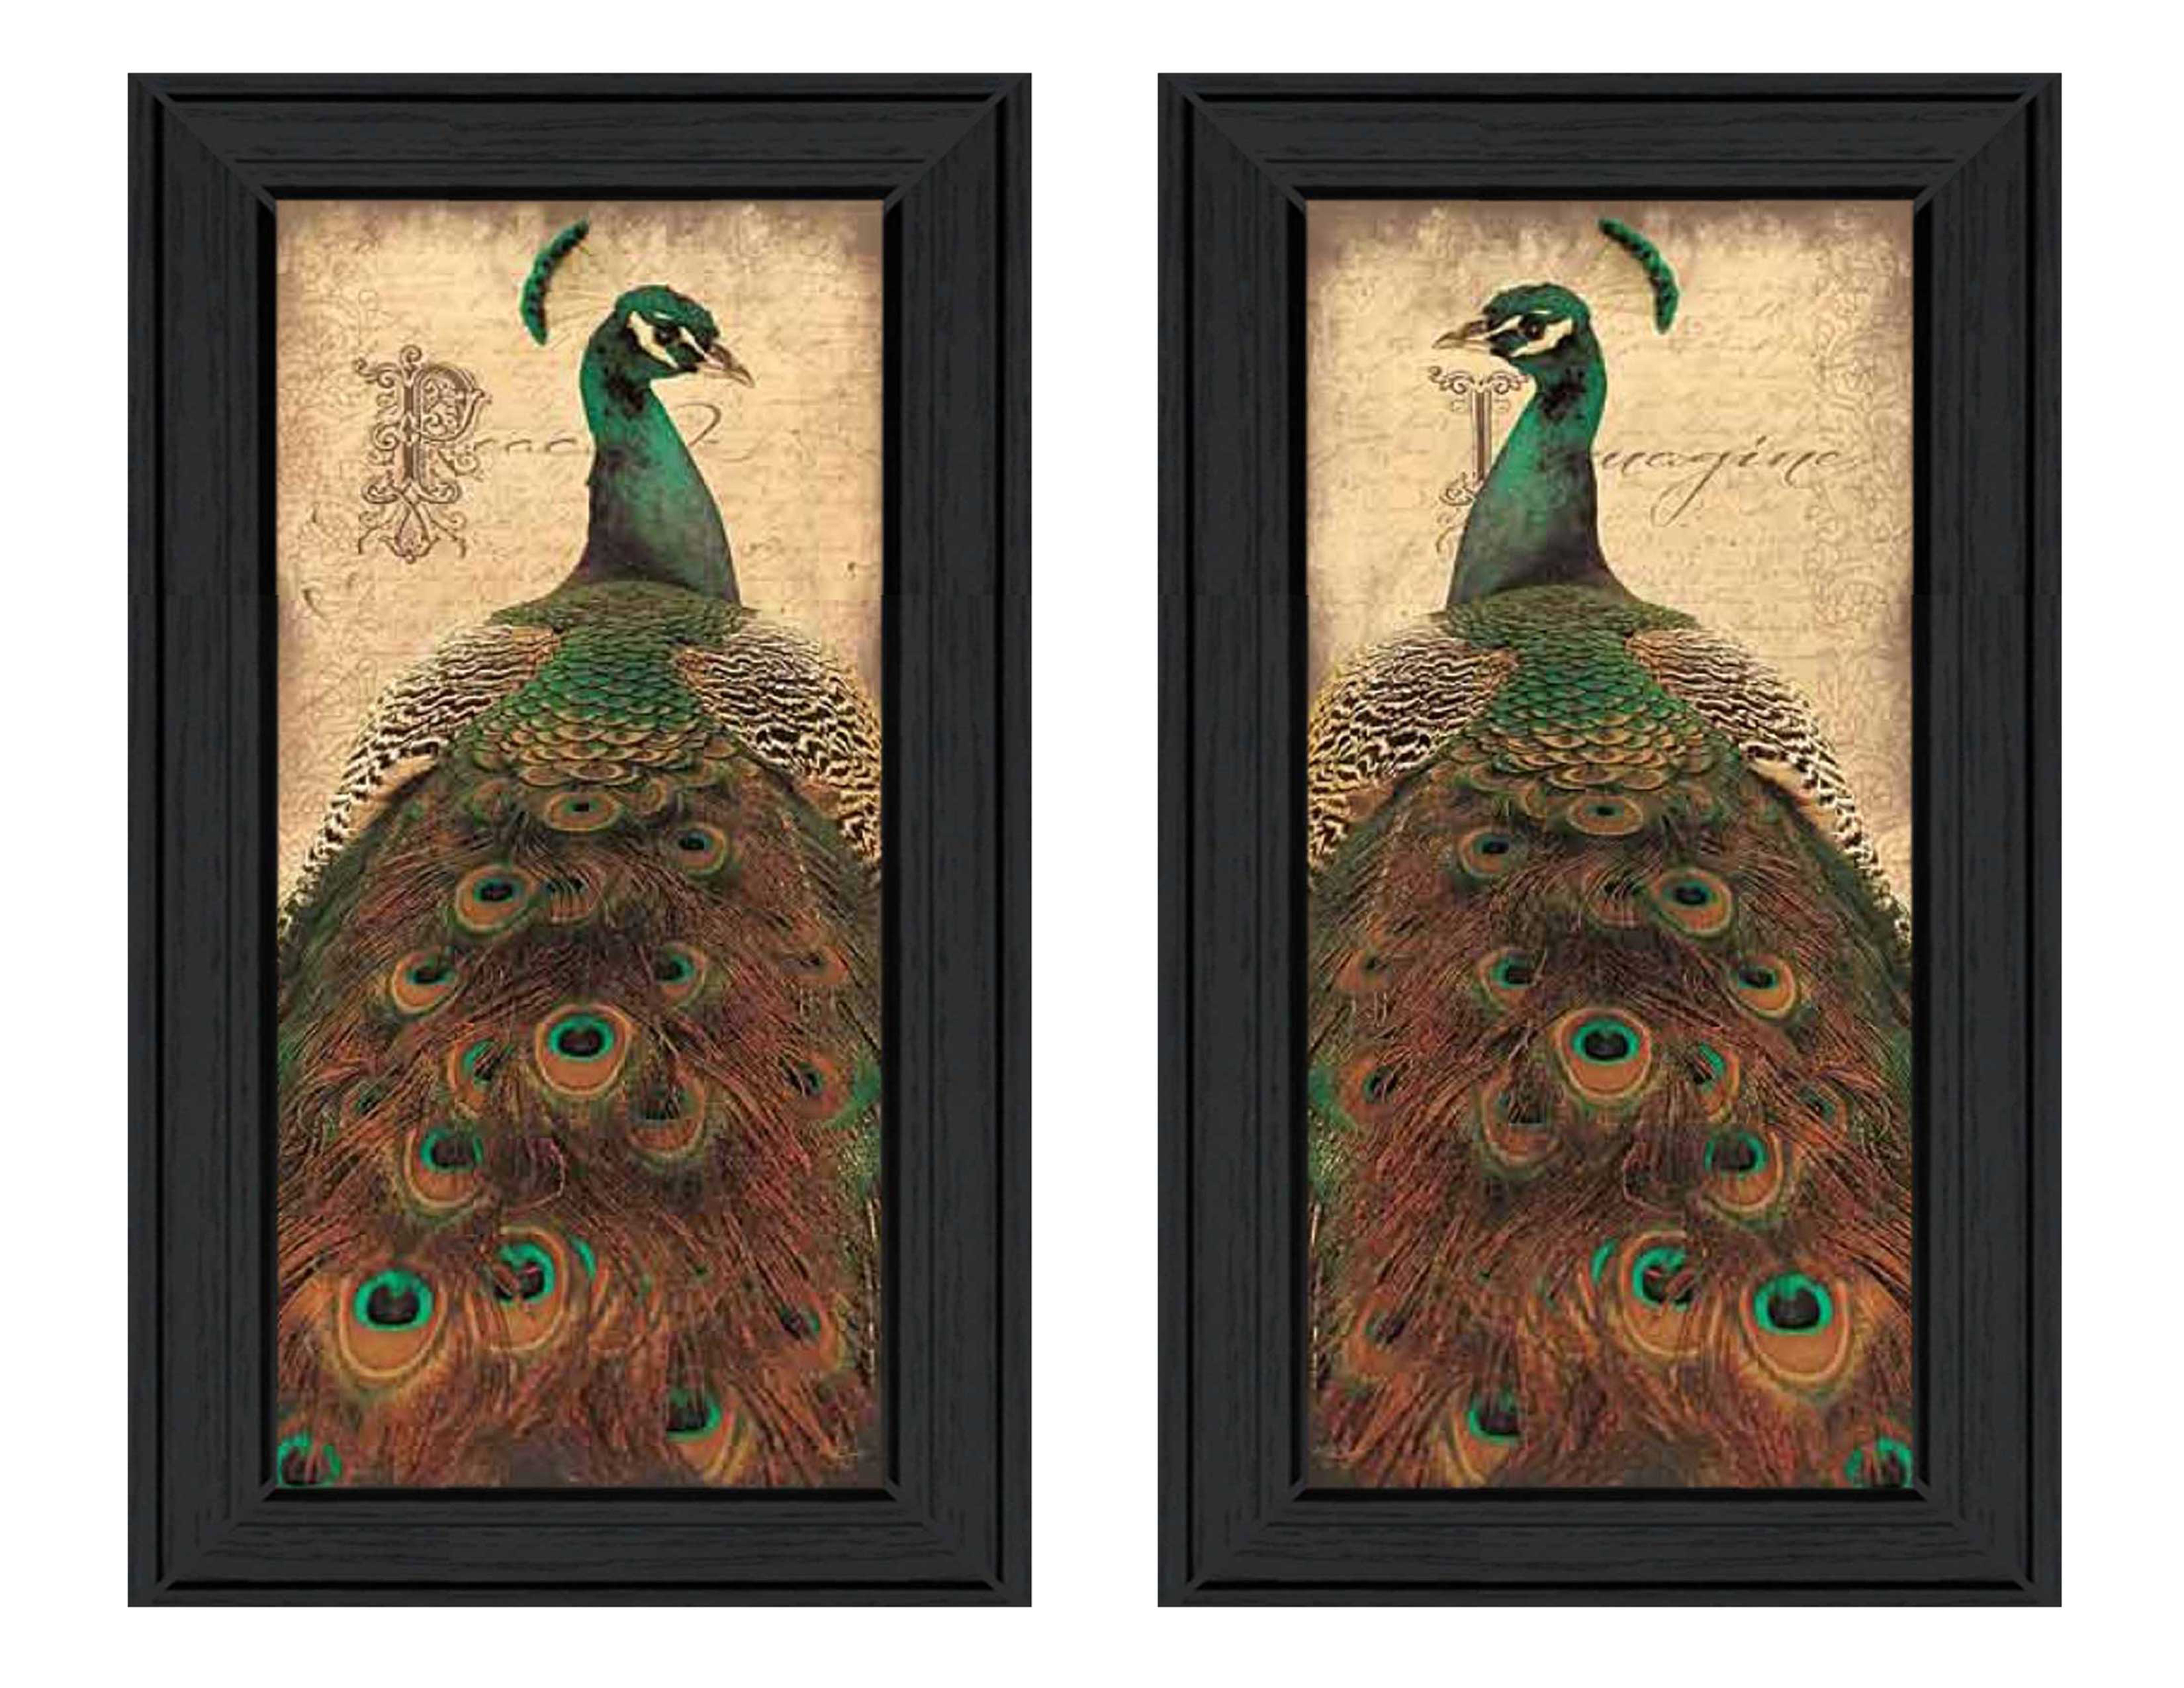 "Peacock Collection" 2-Piece Vignette By John Jones, Printed Wall Art, Ready To Hang Framed Poster, Black Frame